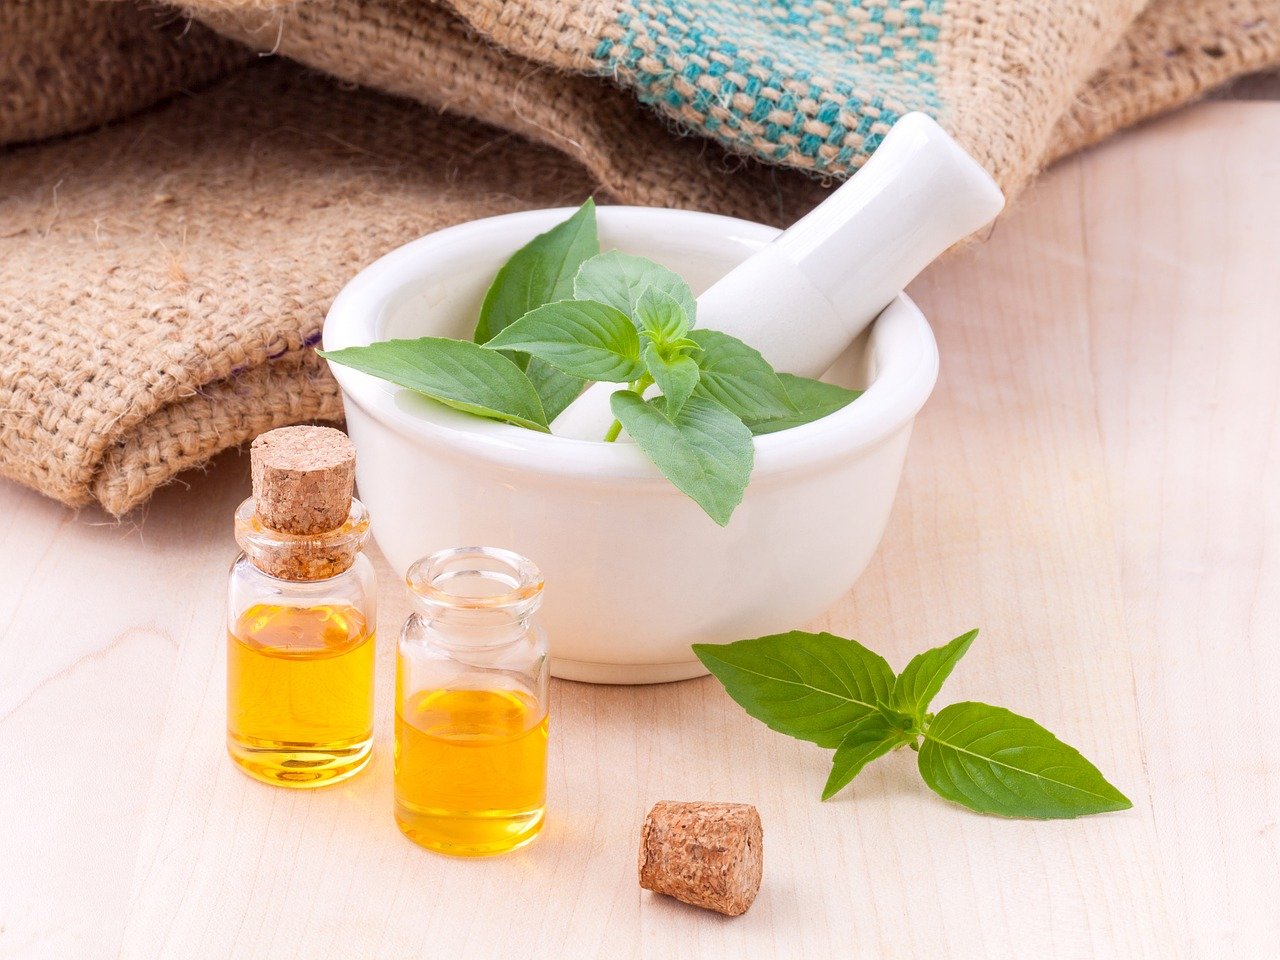 Are Natural Skin Care Products the Answer to All Problems?